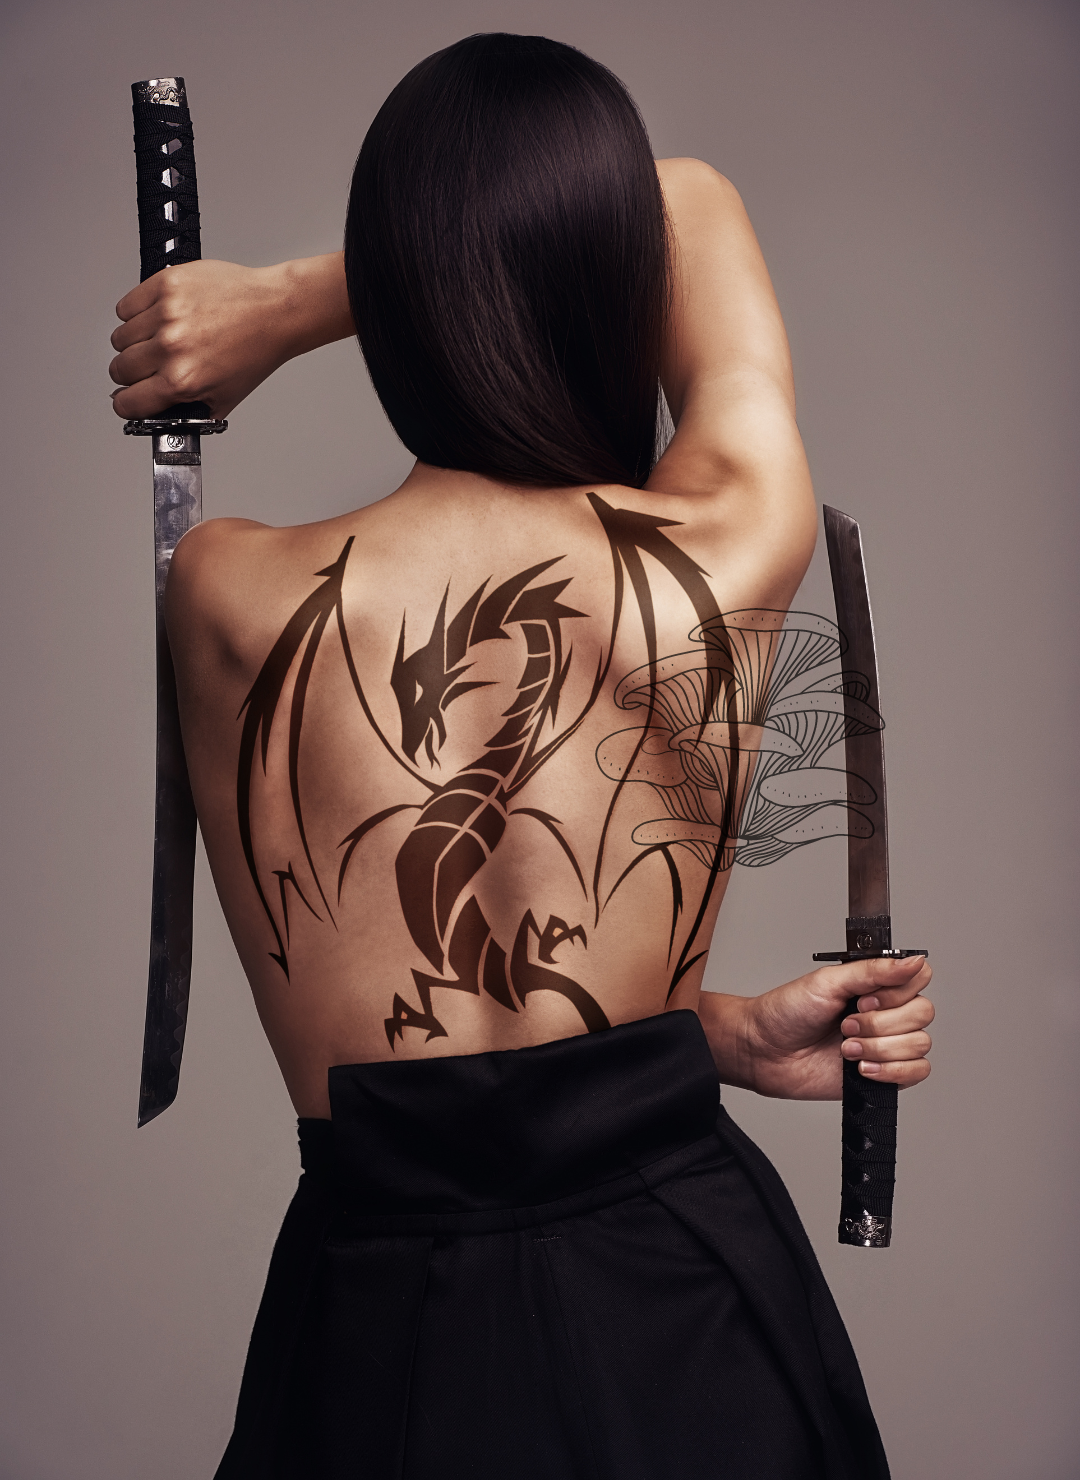 Japanese Dragon Tattoo: Unveiling Symbolism and Dazzling Designs